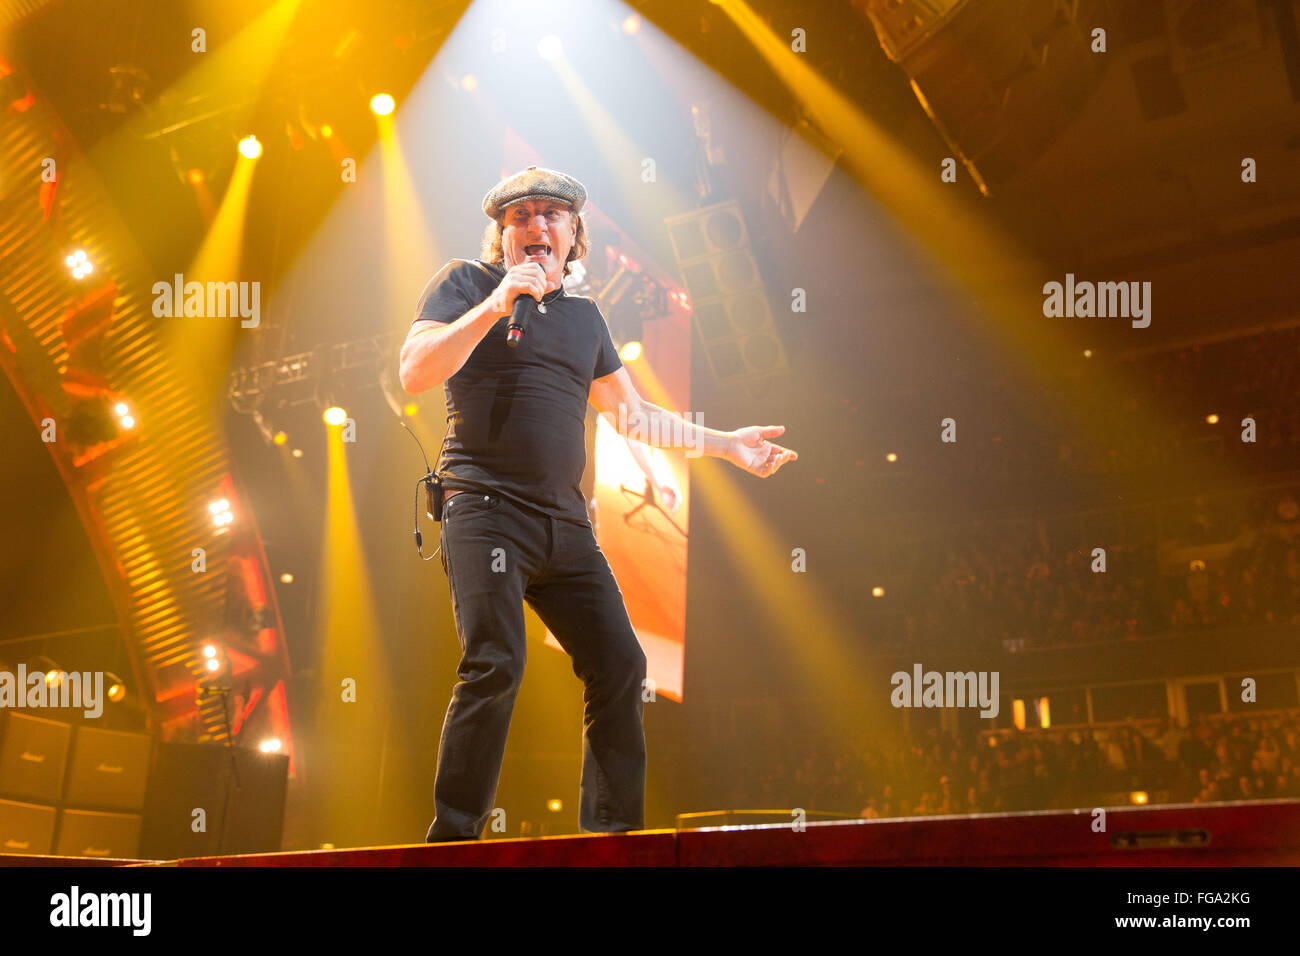 Chicago, Illinois, USA. 17th Feb, 2016. Singer BRIAN JOHNSON of AC/DC performs live on the Rock or Bust tour at the United Center in Chicago, Illinois © Daniel DeSlover/ZUMA Wire/Alamy Live News Stock Photo